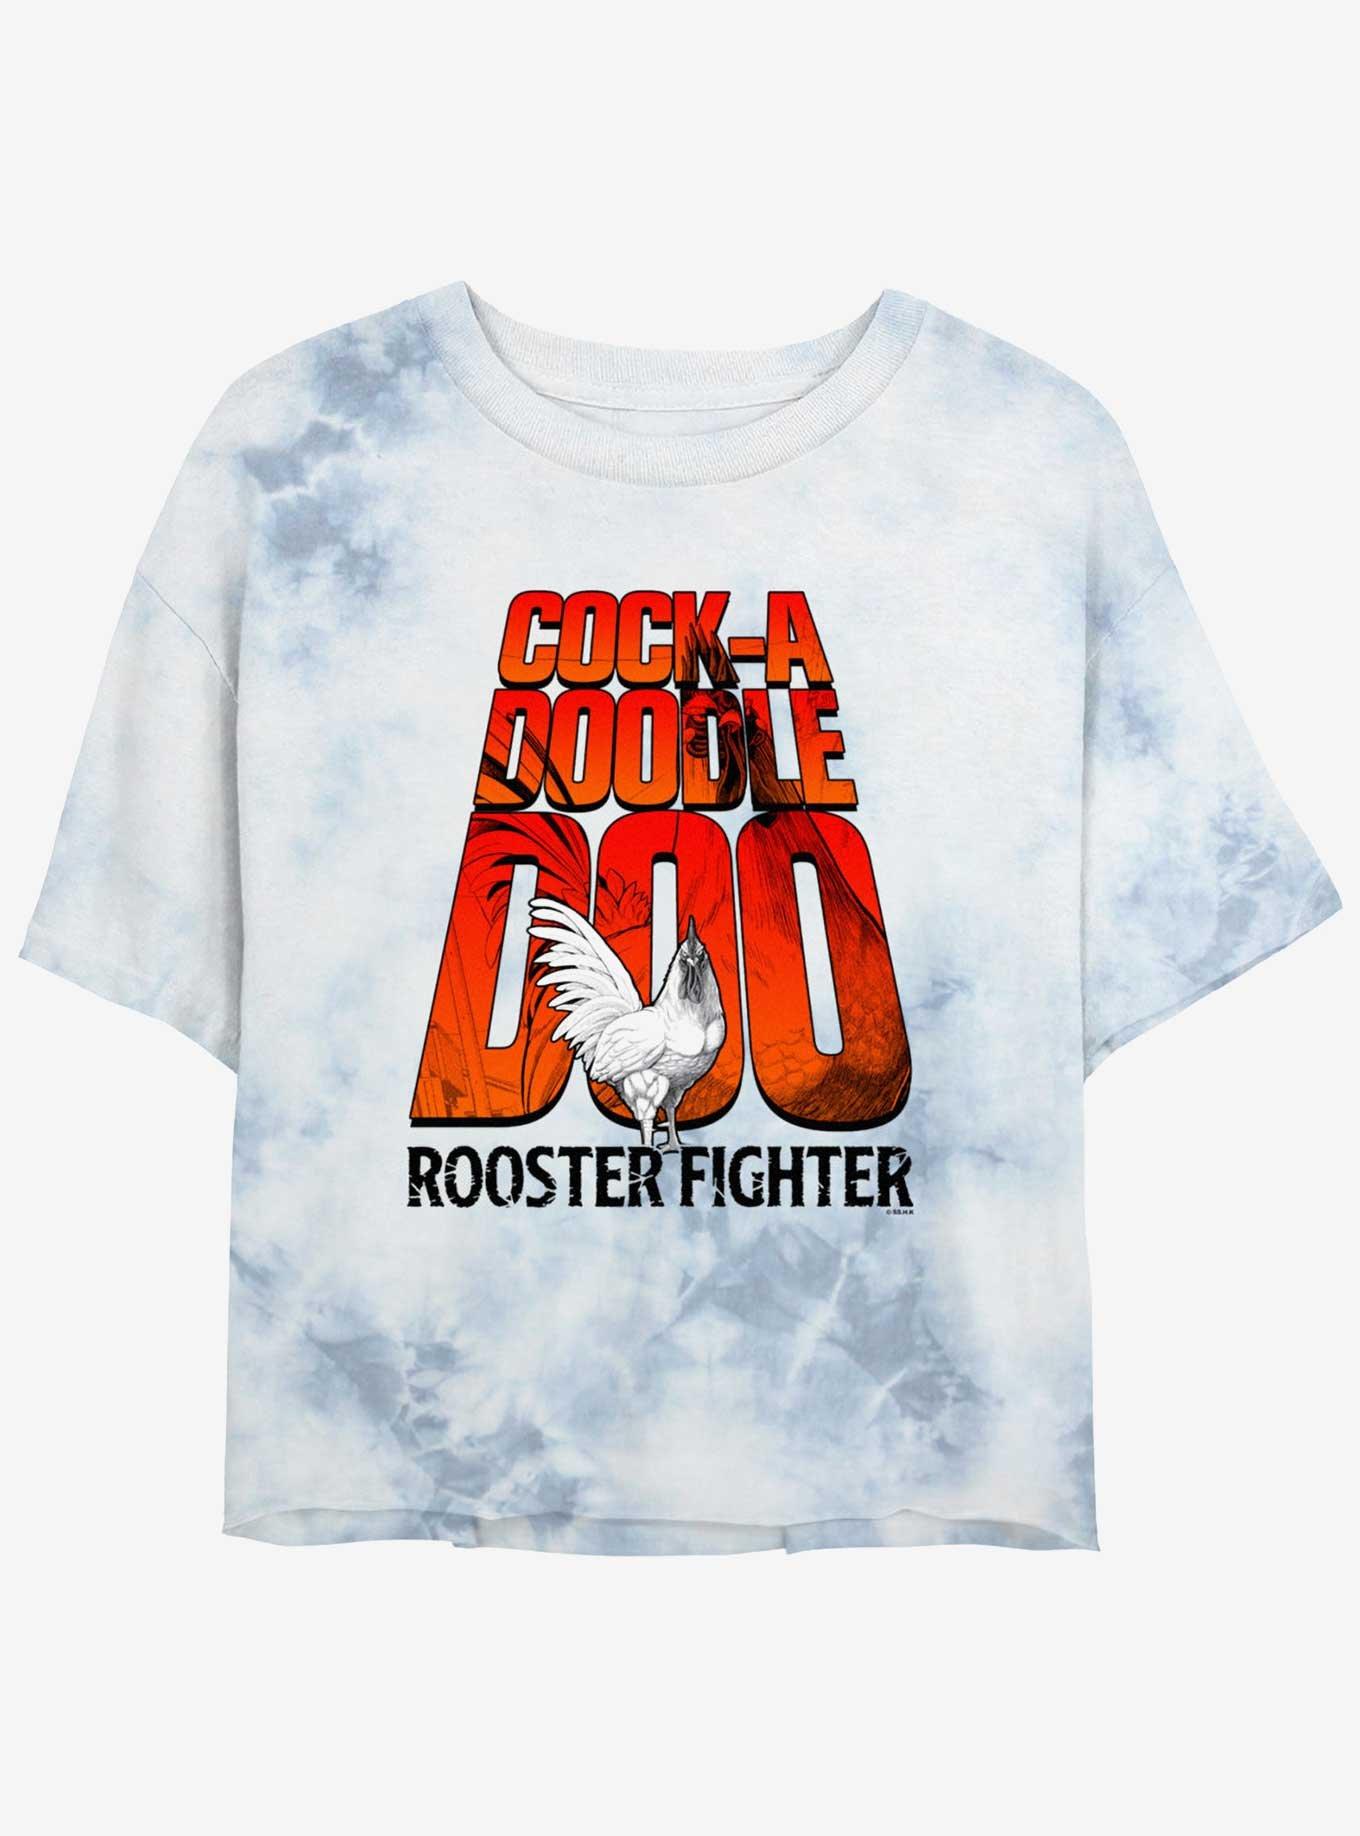 Rooster Fighter Cock-A-Doodle-Doo Logo Womens Tie-Dye Crop T-Shirt, WHITEBLUE, hi-res